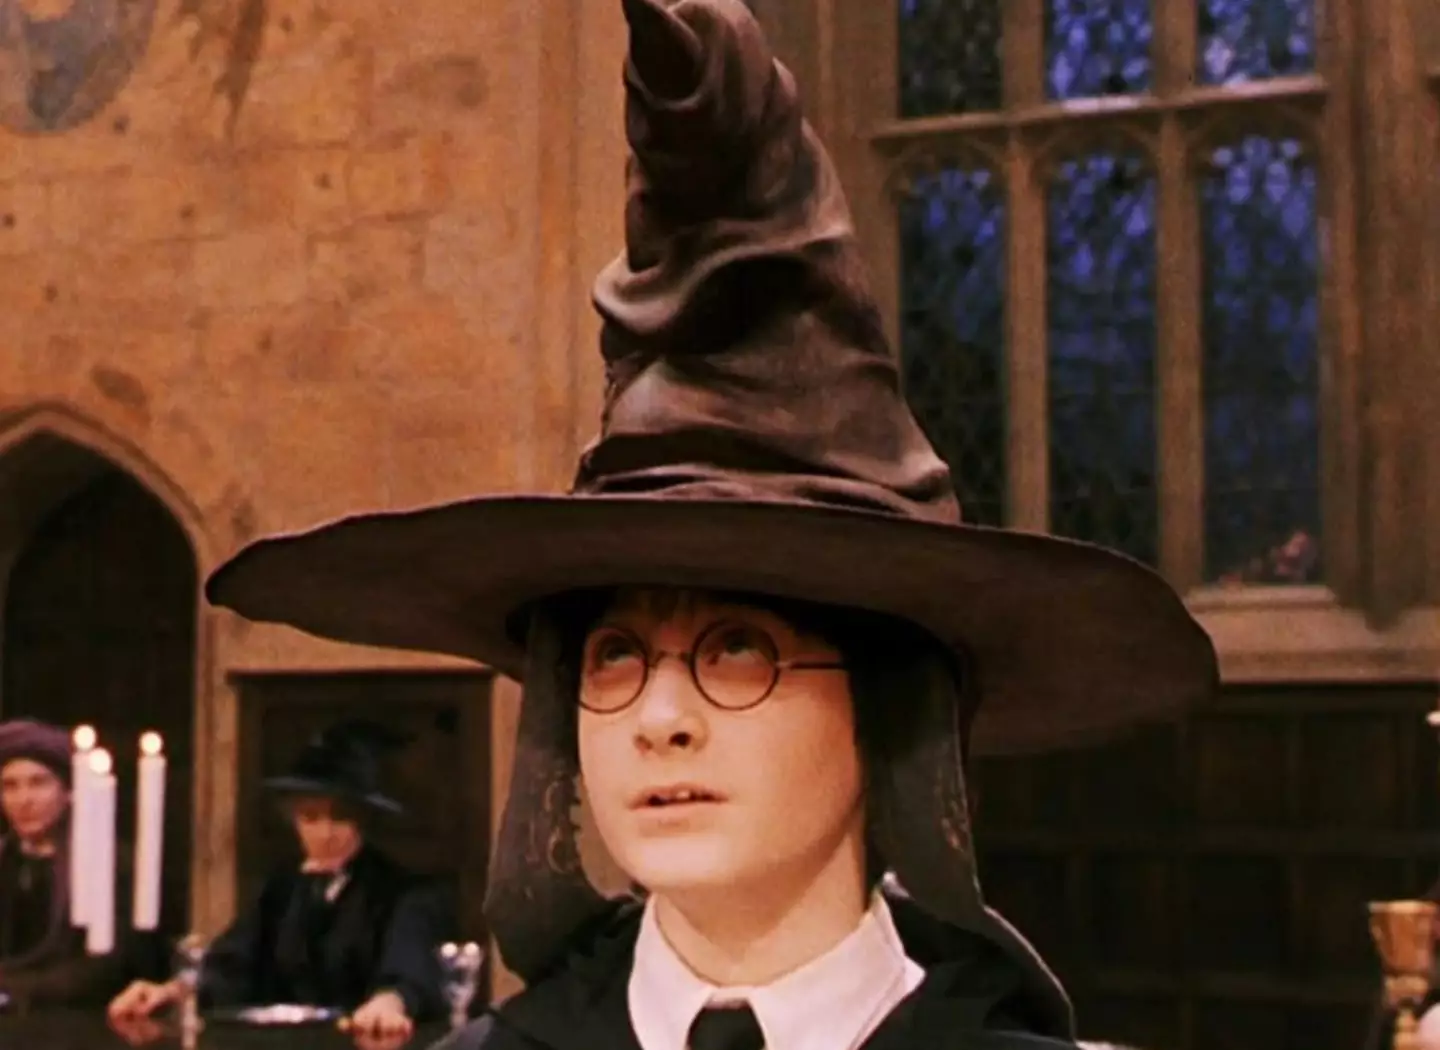 You won't need to worry about the Sorting Hat on the MA course.